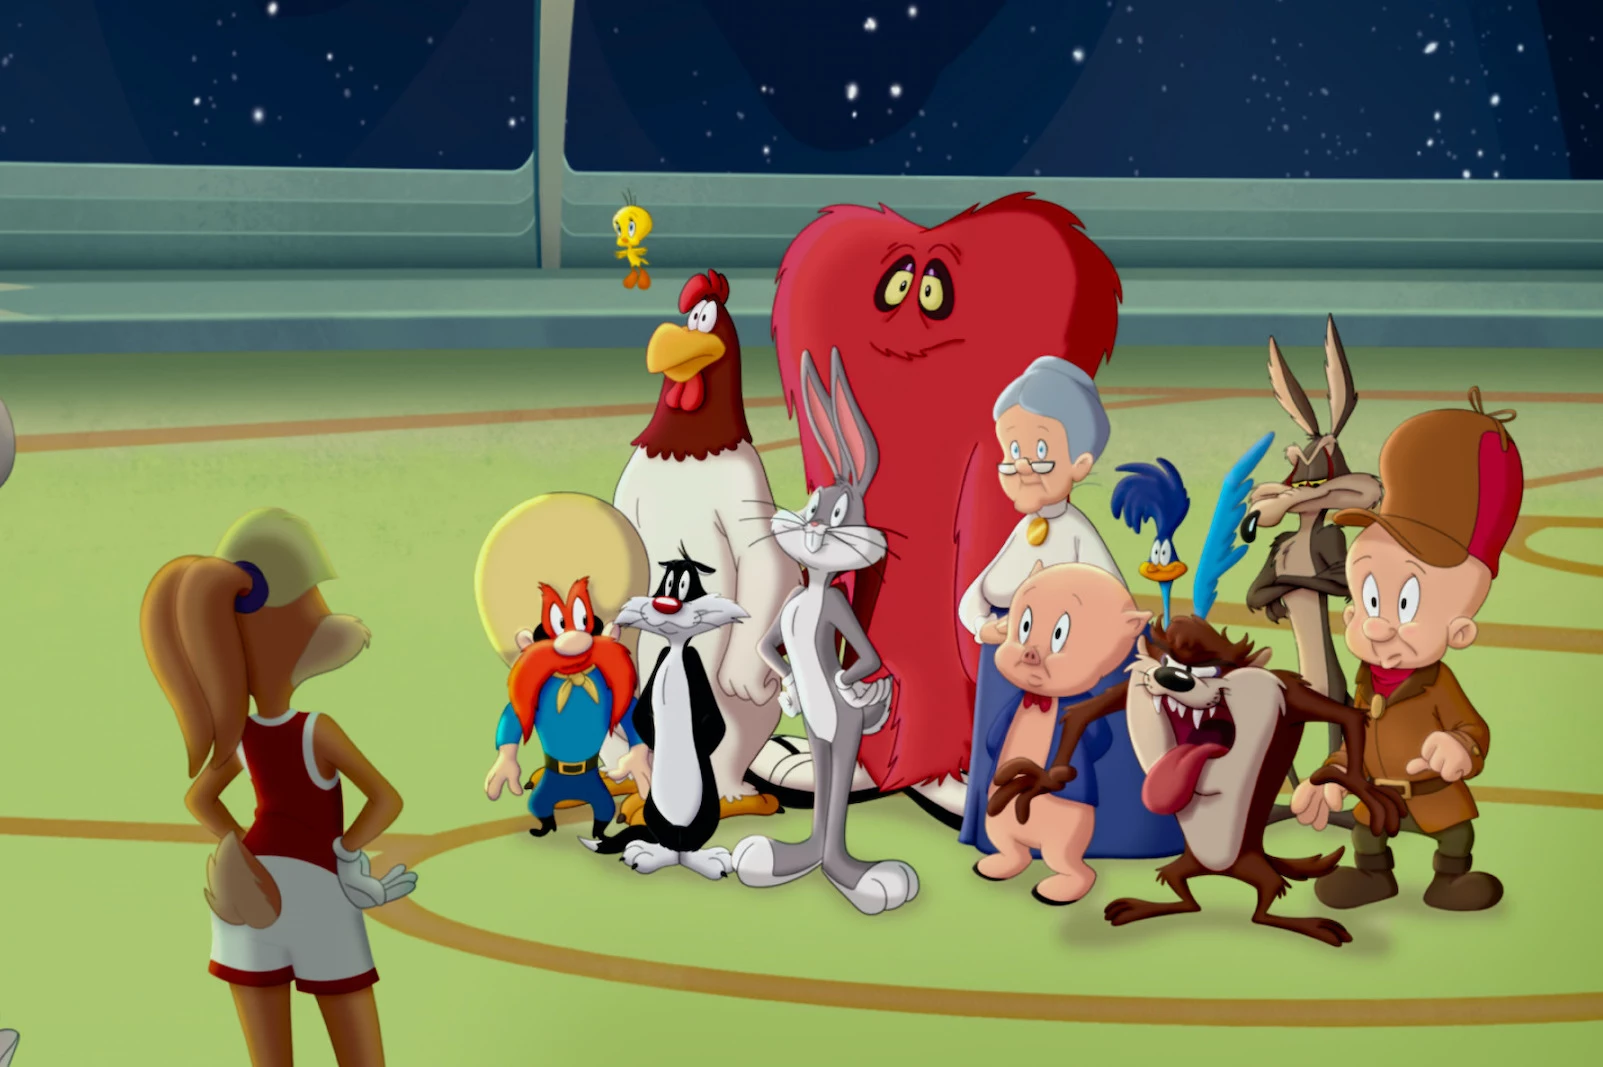 download animaniacs space jam a new legacy